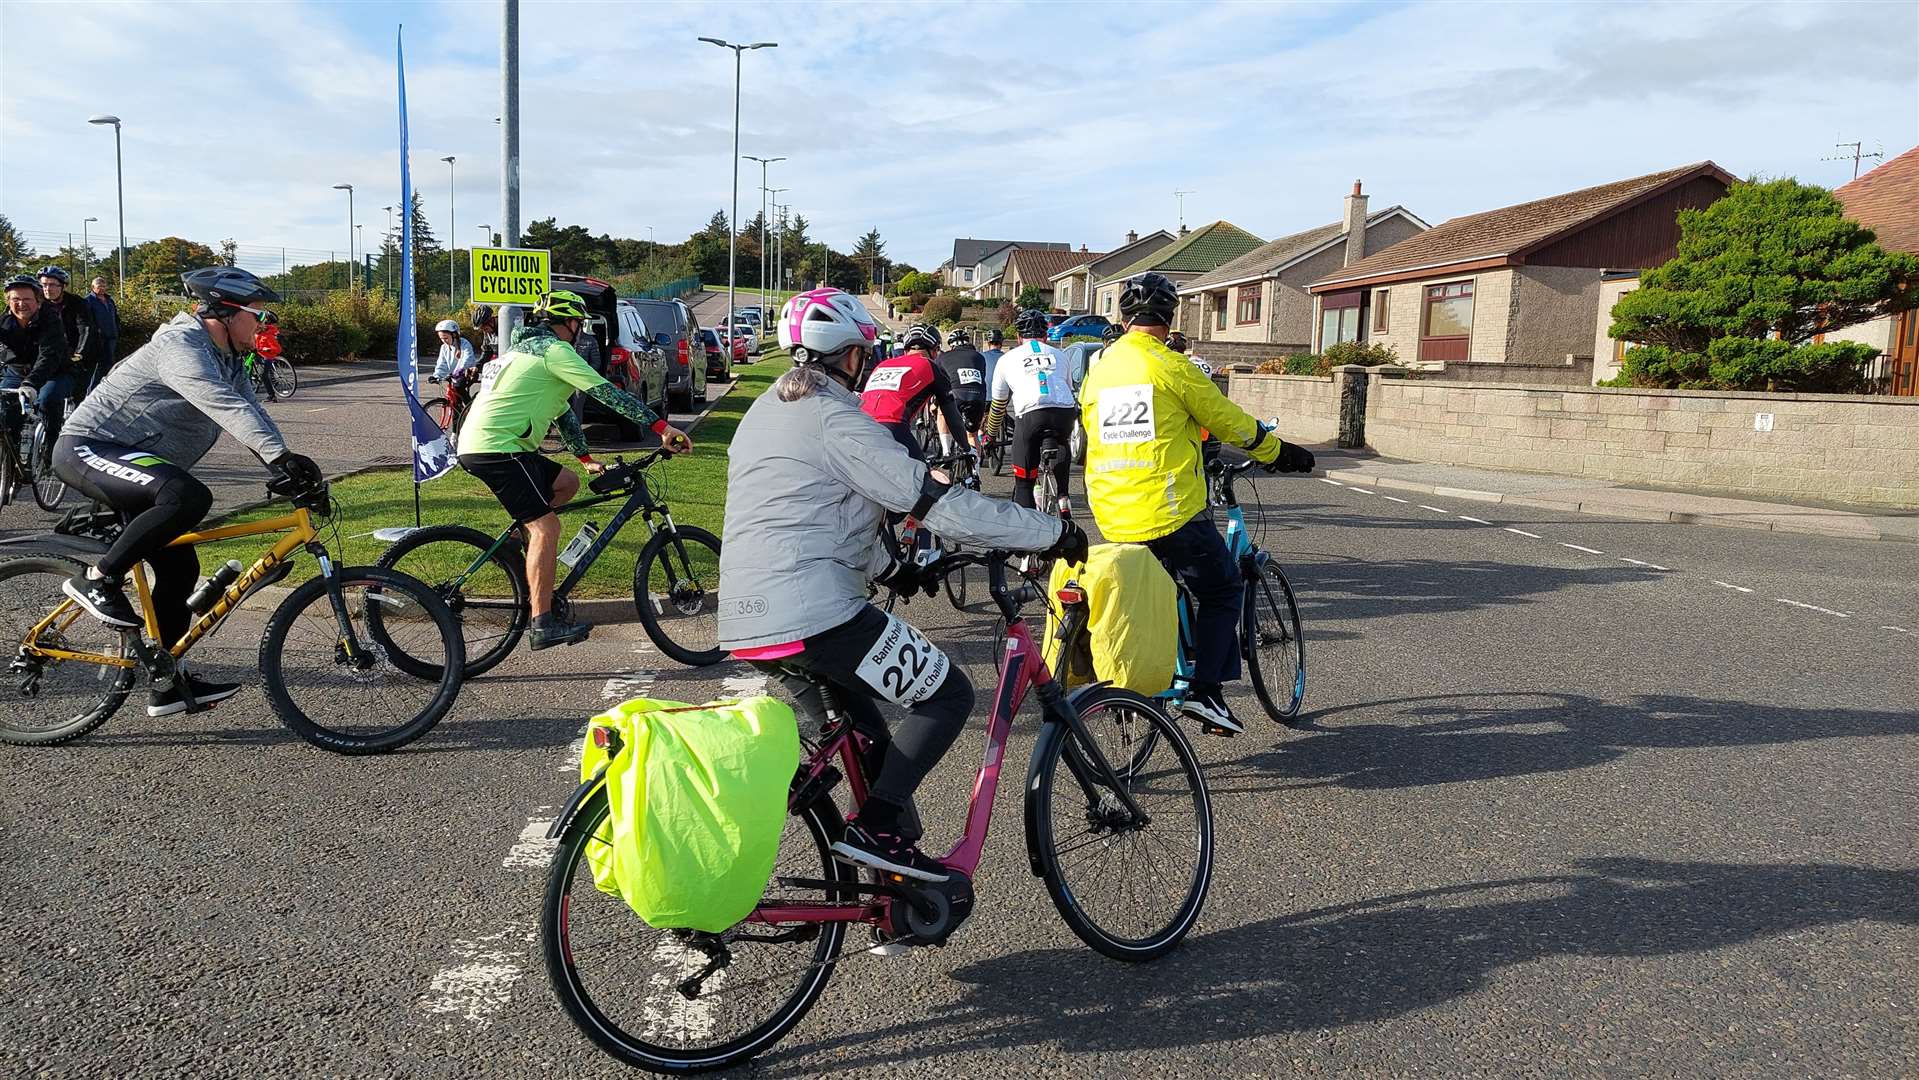 The Banffshire Cycle Challenge will take place on Sunday, May 28.